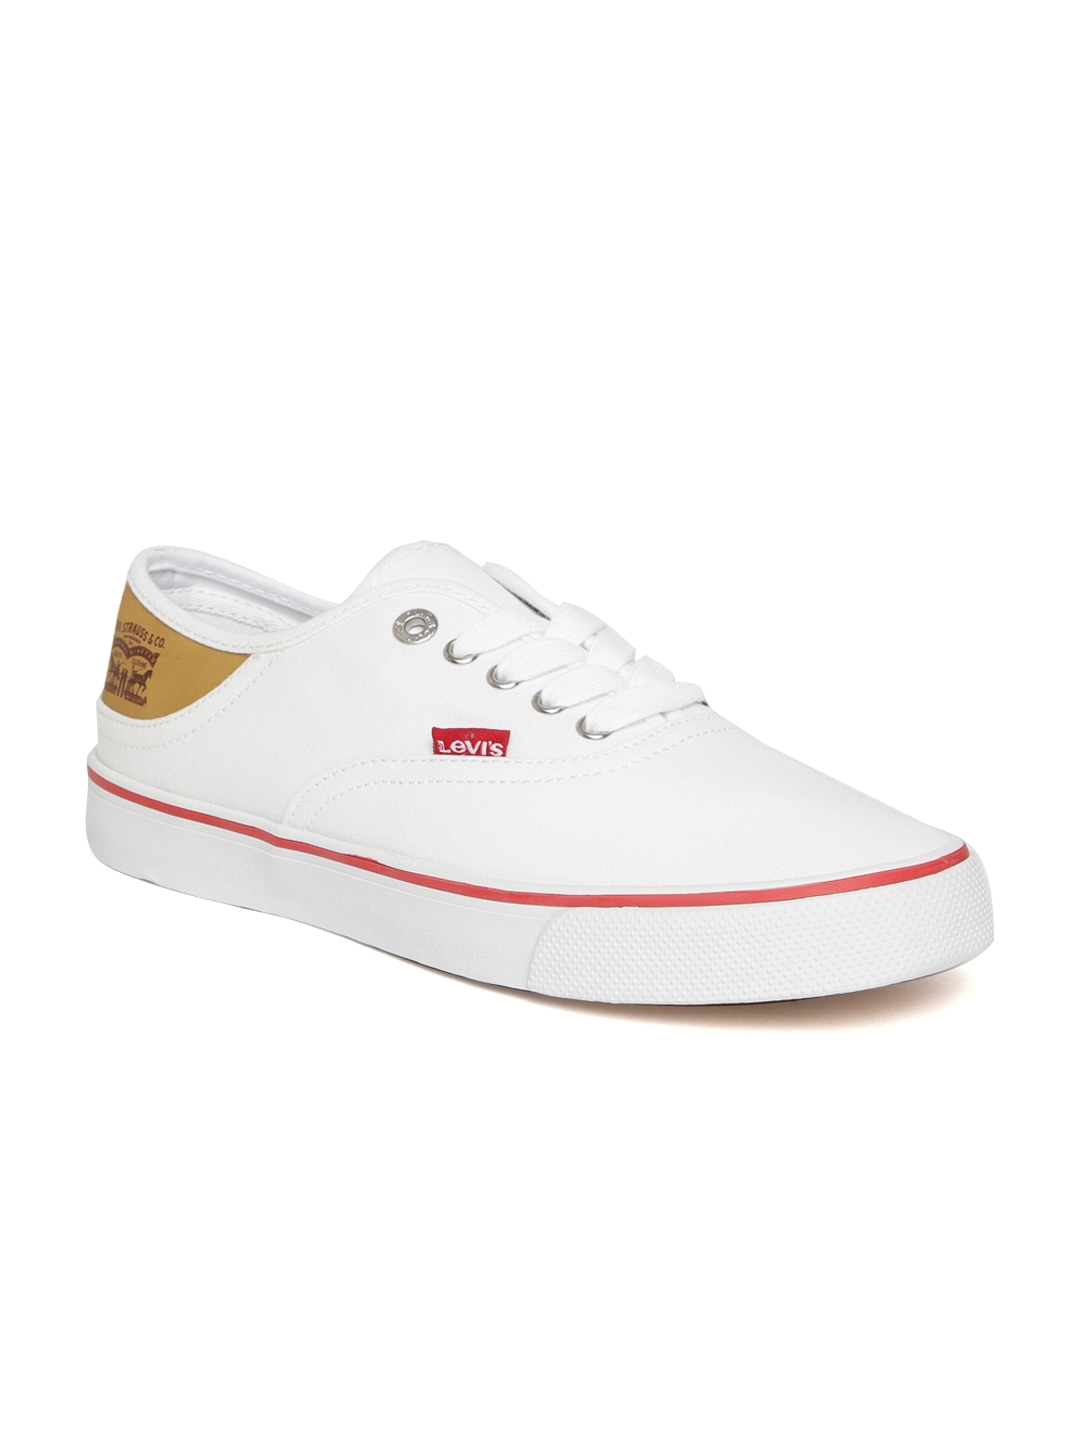 Buy Levis Men White Sneakers - Casual Shoes for Men 8857061 | Myntra